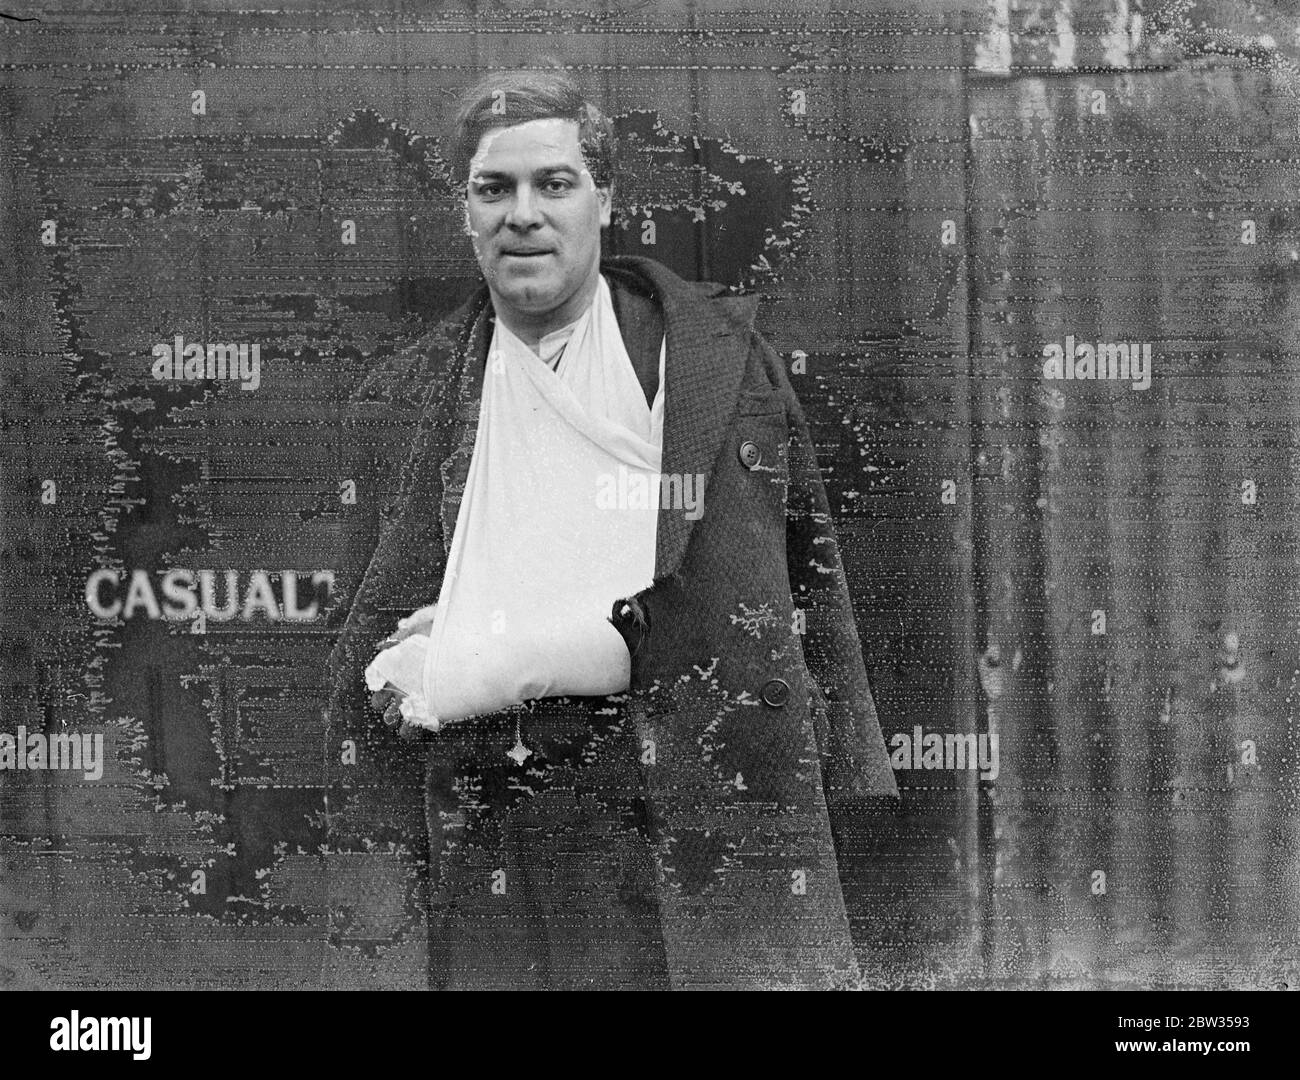 Injured in Cricklewood tramway disaster . Among those who were injured when a tramcar overturned at Cricklewood Broadway , North West London , while taking passengers home to lunch from work was Mr J A Skeet , employed by the London Midland and Scottish Railway . His wrist was fractured and ribs damaged . Mr J A Skeet leaving the Willesden General Hospital after being treated for his injuries . 20 February 1933 Stock Photo